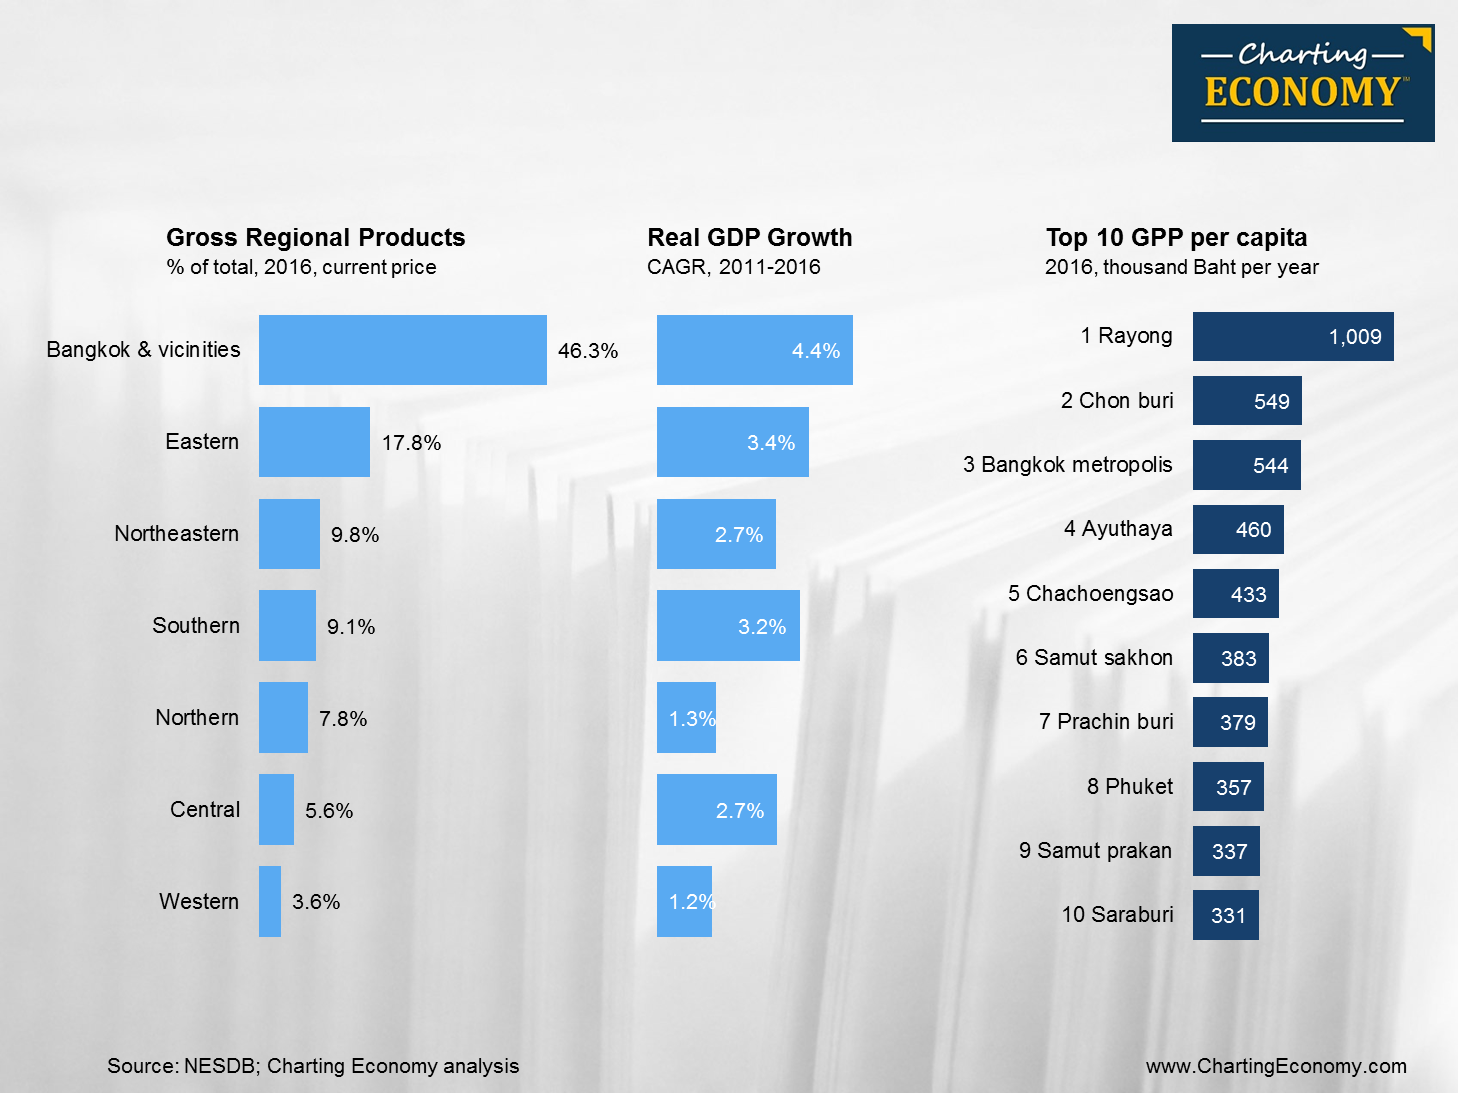 Where are the key economic regions in Thailand? Charting Economy